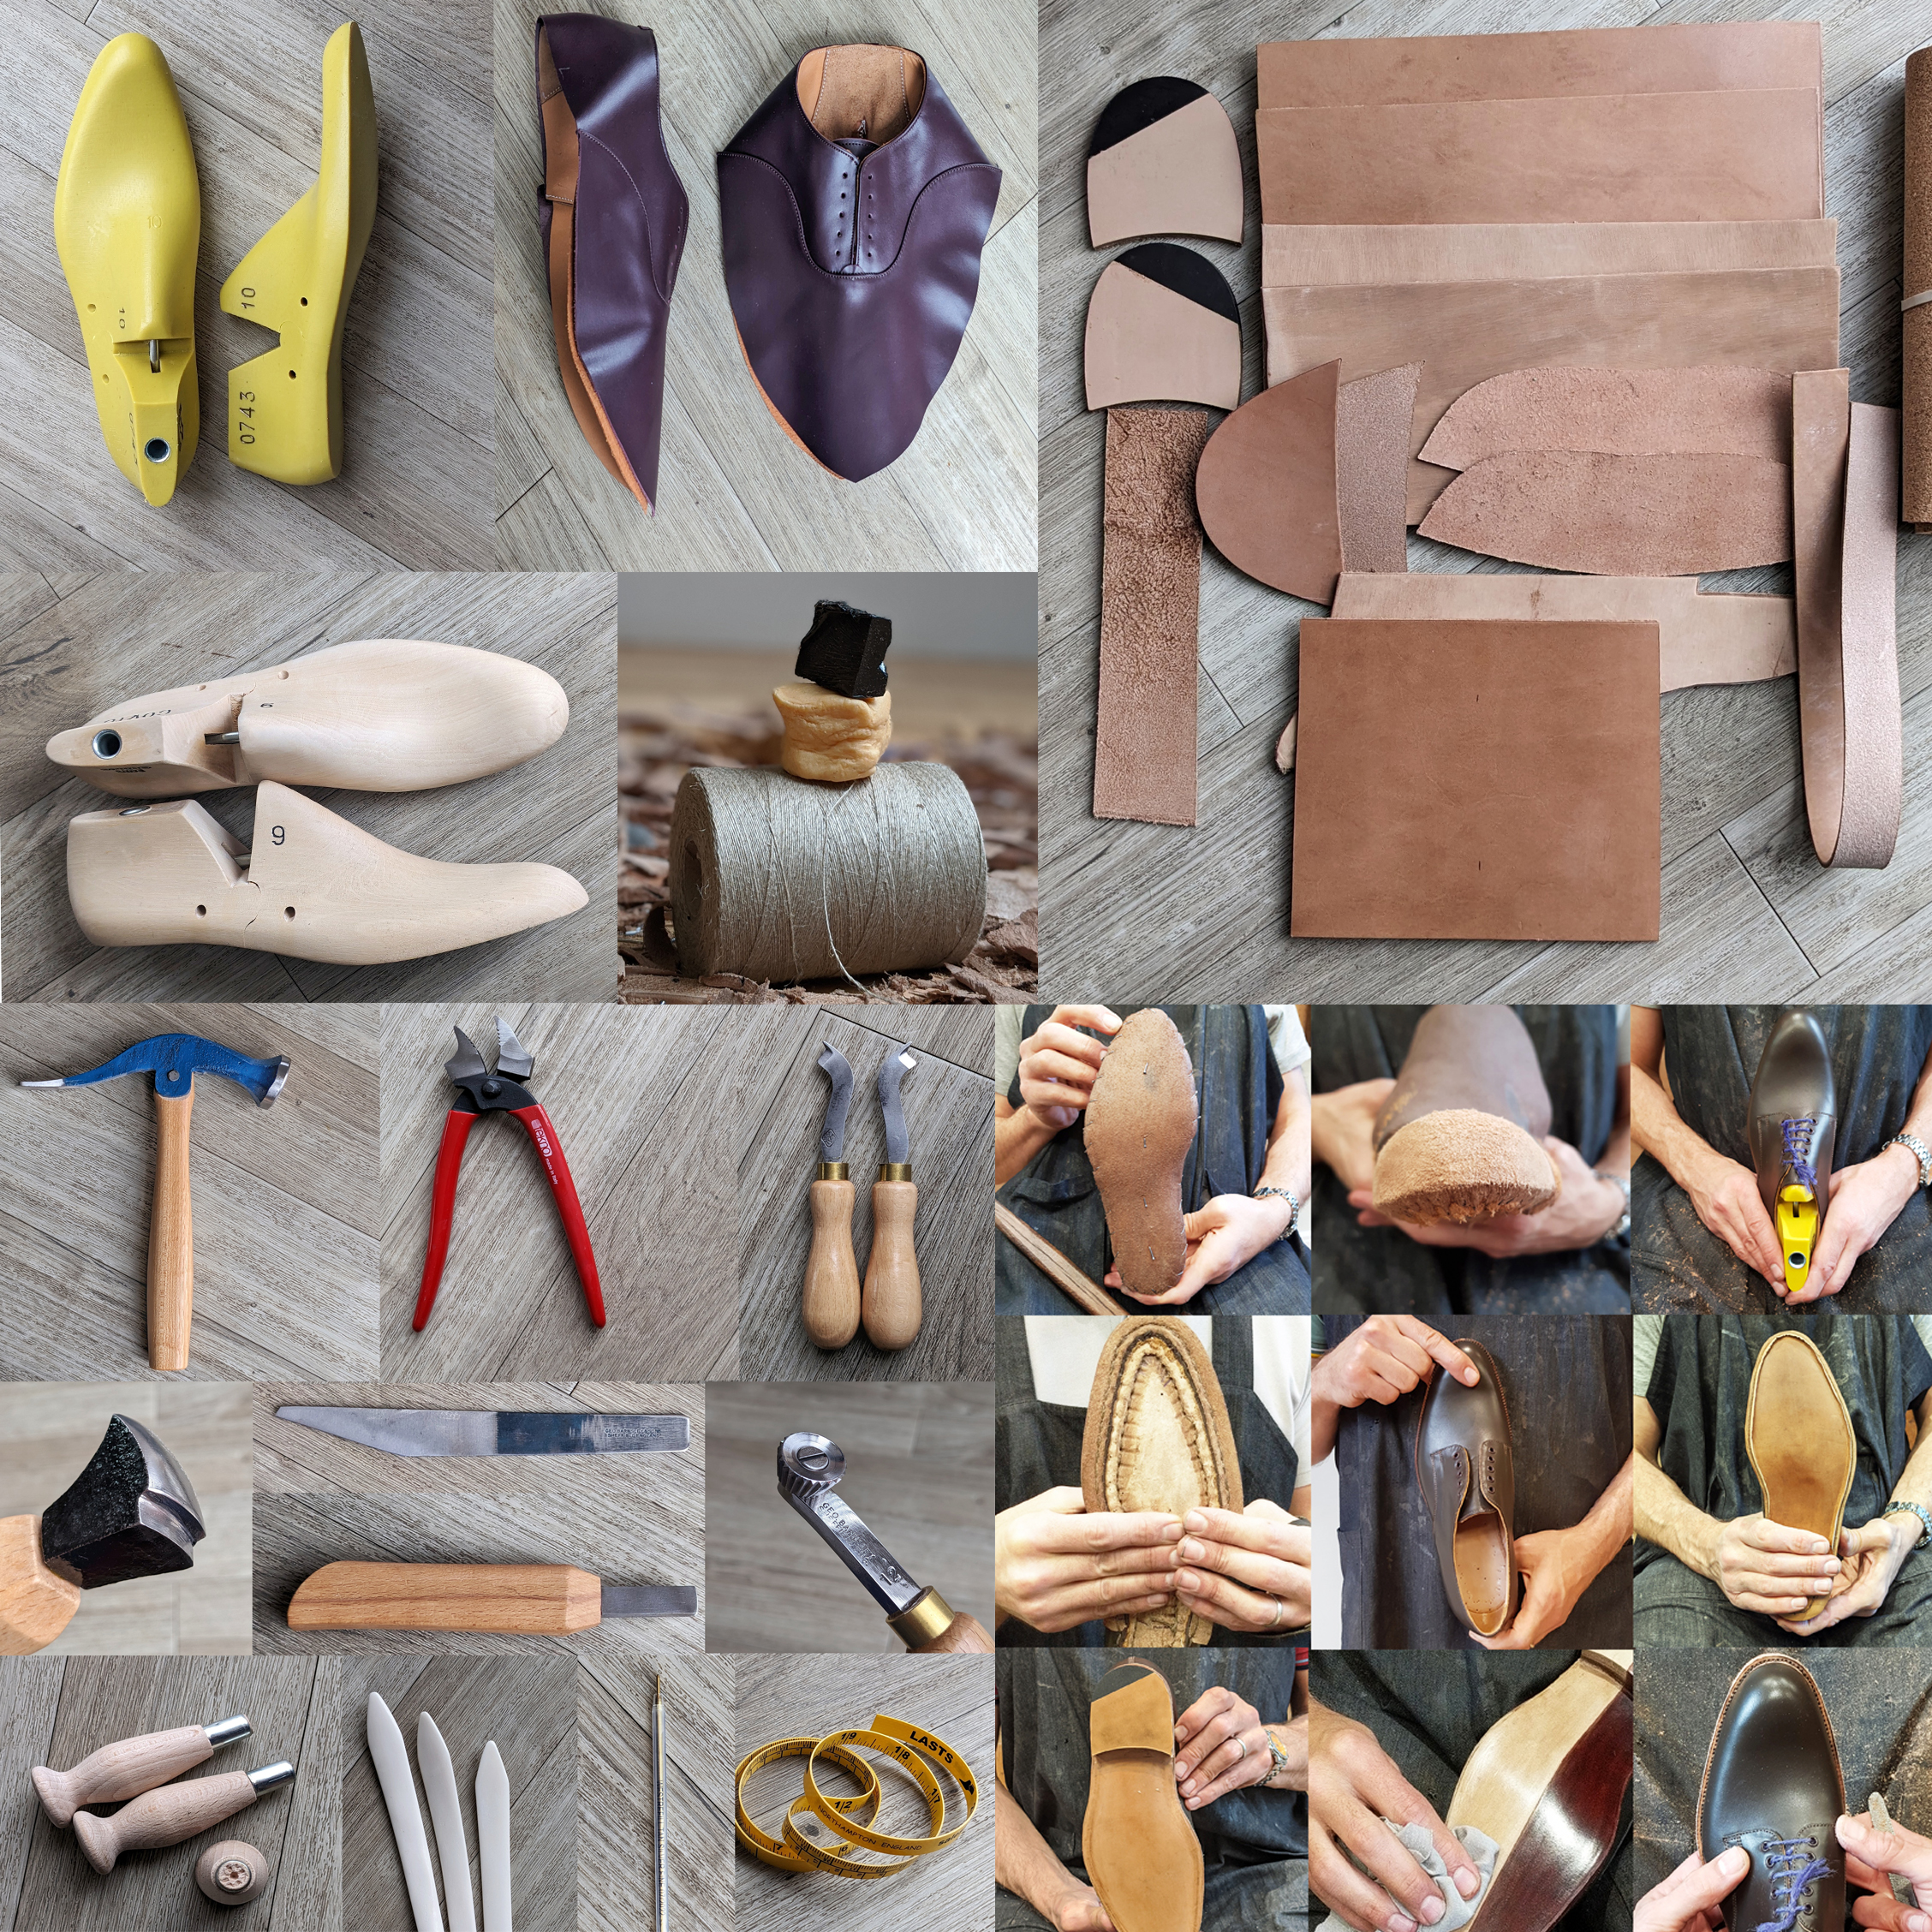 Shoe Making Kit, all you need to make shoes